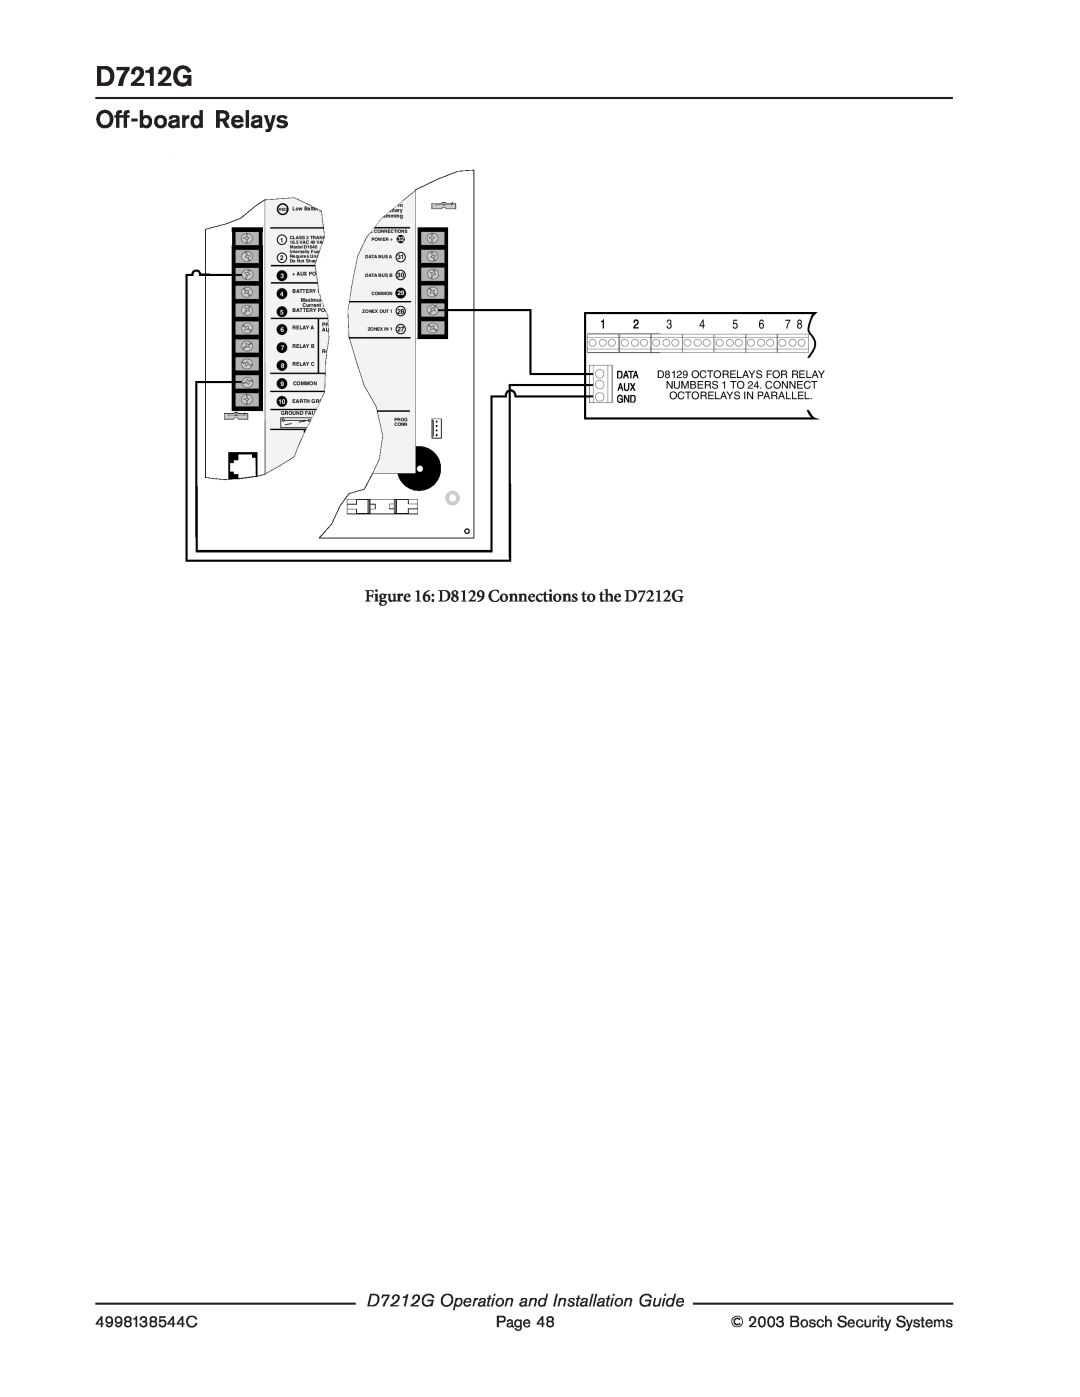 Bosch Appliances manual Off-boardRelays, D8129 Connections to the D7212G, D7212G Operation and Installation Guide 